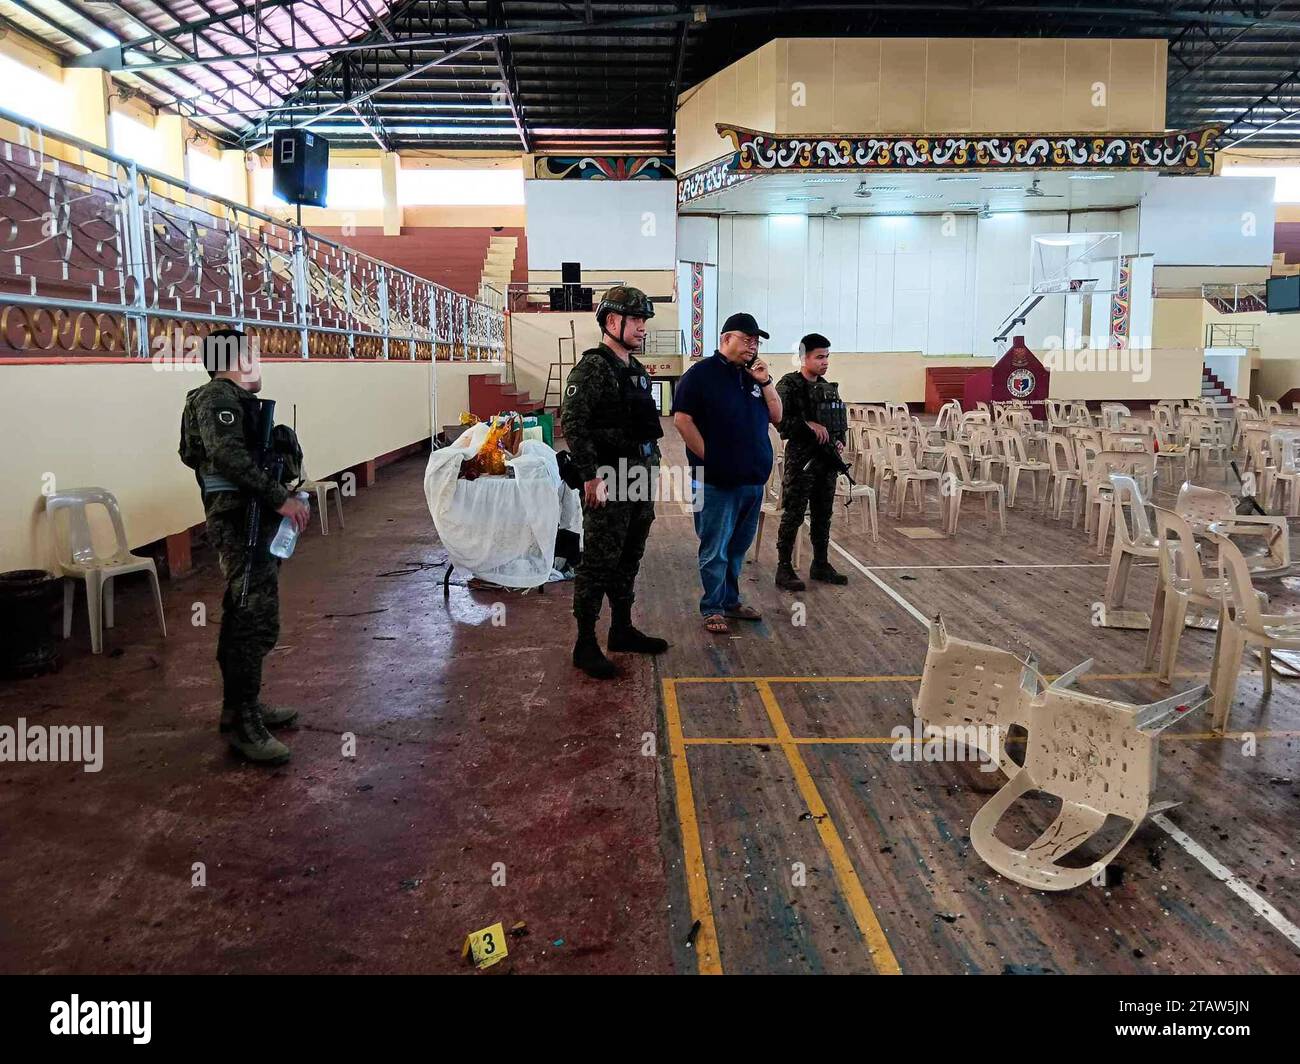 Marawi. 3rd Dec, 2023. Police investigators and soldiers are seen at the site of an explosion in Marawi City, Lanao del Sur province, the Philippines on Dec. 3, 2023. At least four were killed and 50 injured in an explosion inside a gym of Mindanao State University in the Philippines' southern province of Lanao del Sur on Sunday morning, local military and police said. Credit: Xinhua/Alamy Live News Stock Photo